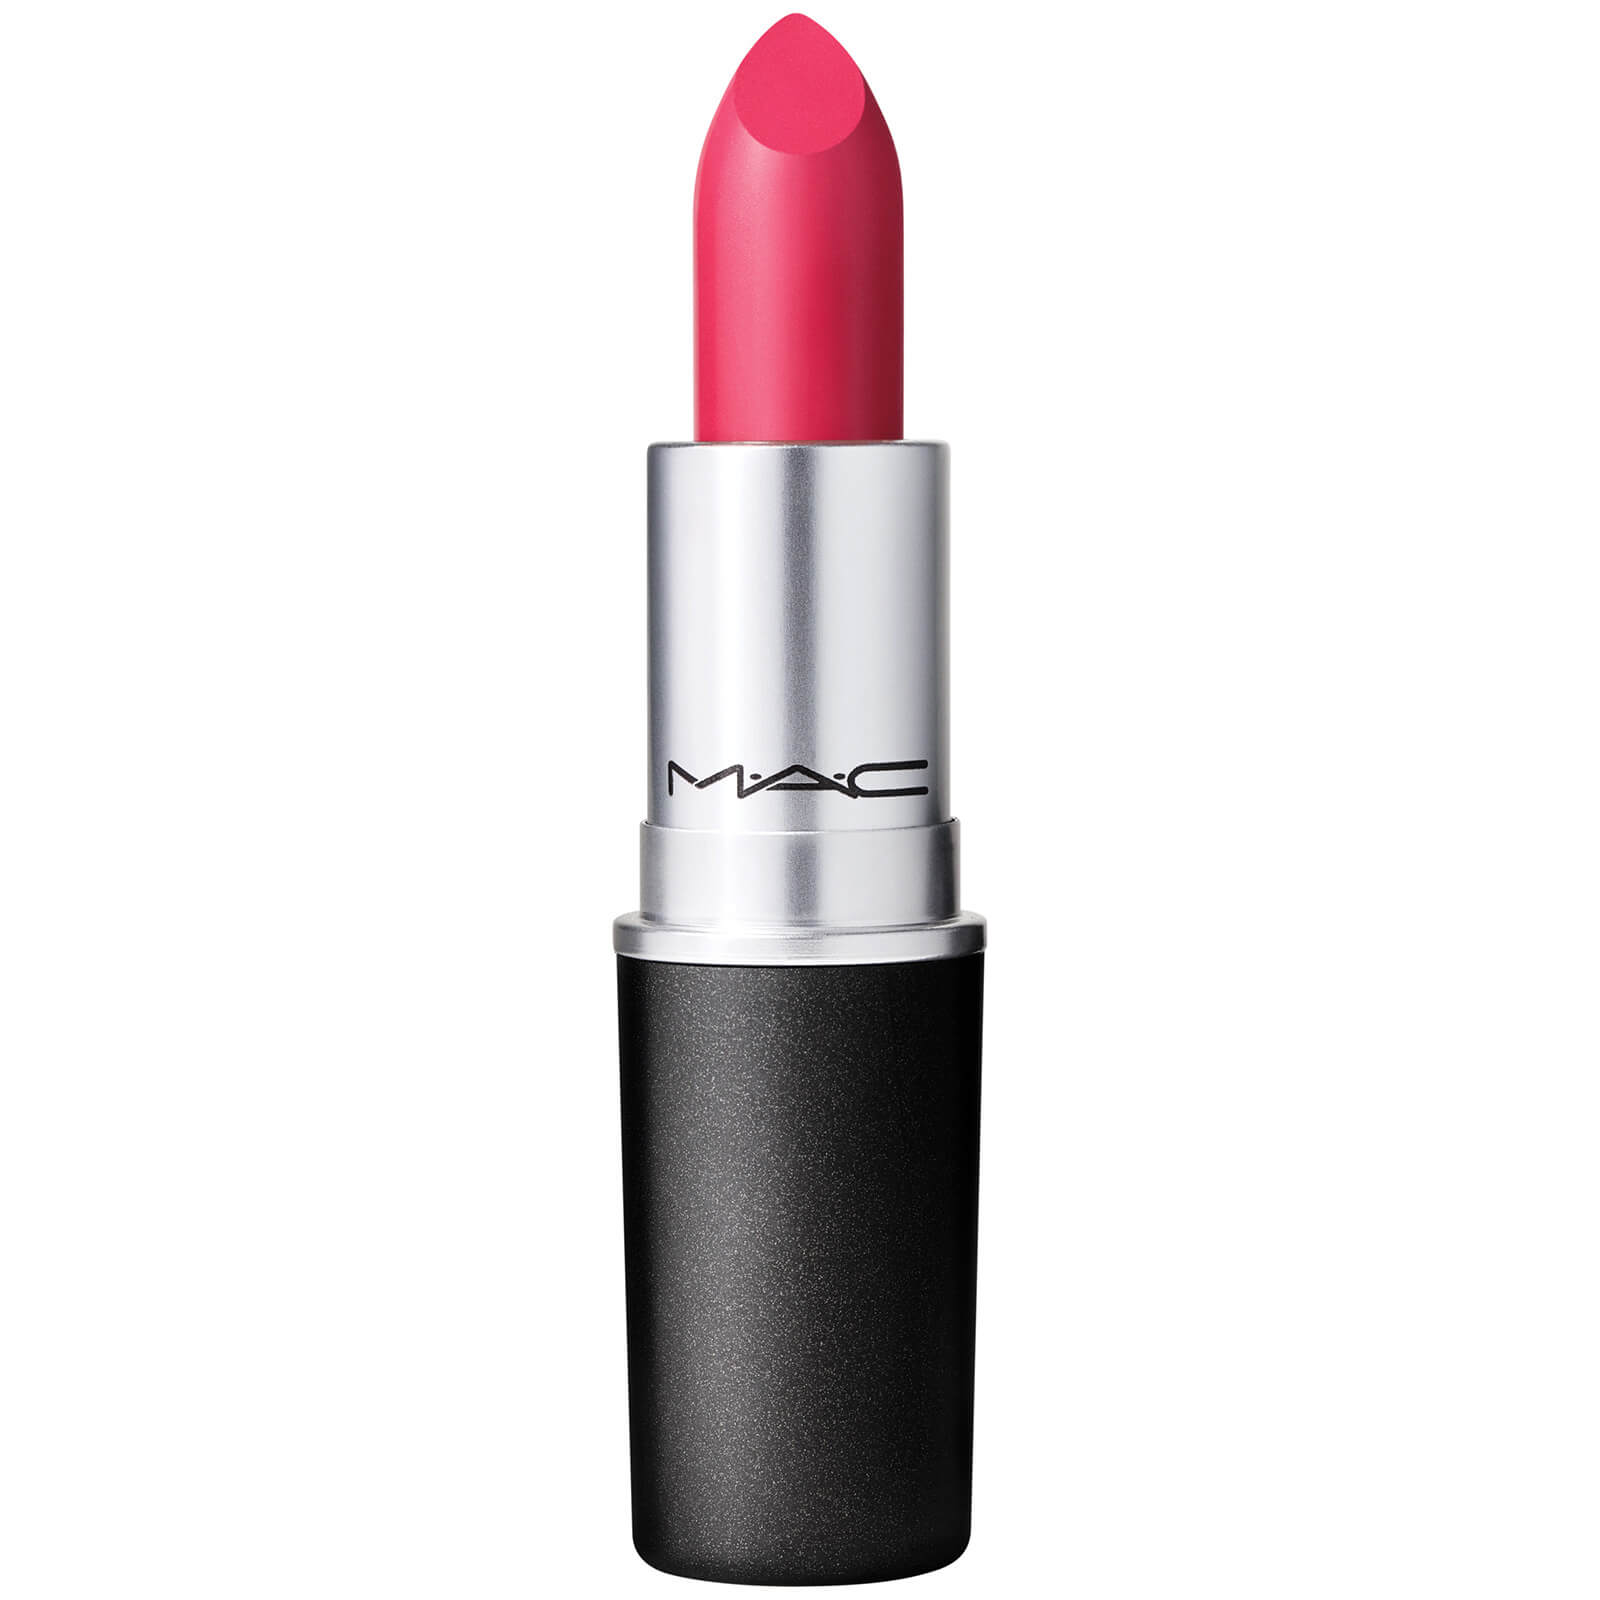 MAC Amplified Crème Lipstick Re-Think Pink (Various Shades) - So You